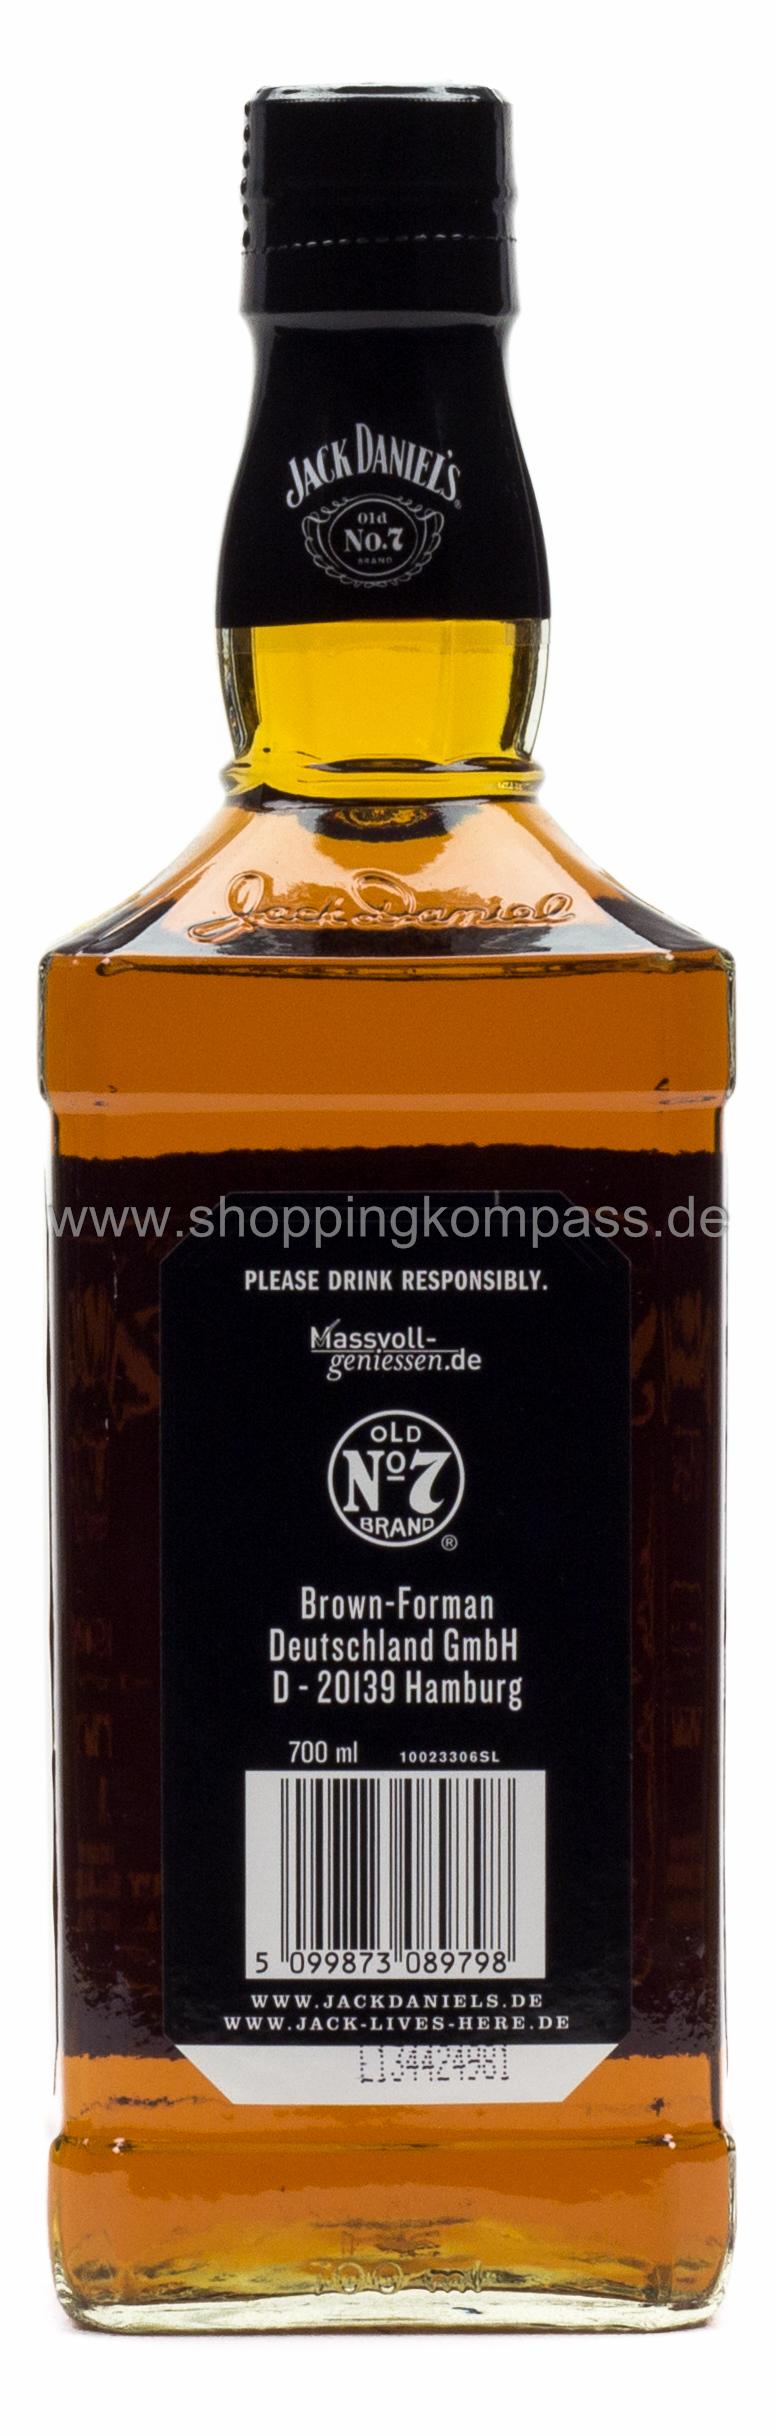 Jack Daniel's Tennessee Whiskey Old No.7 0,7 l